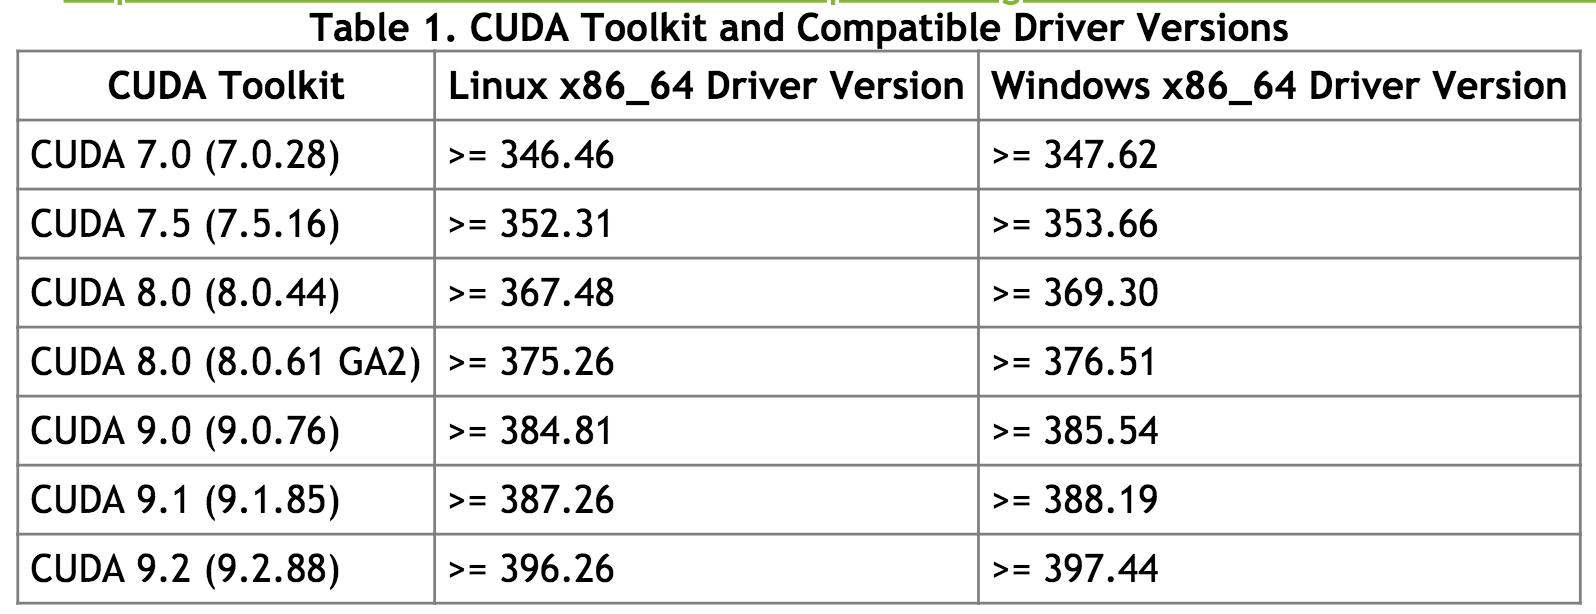 driver versions for Cuda Toolkits